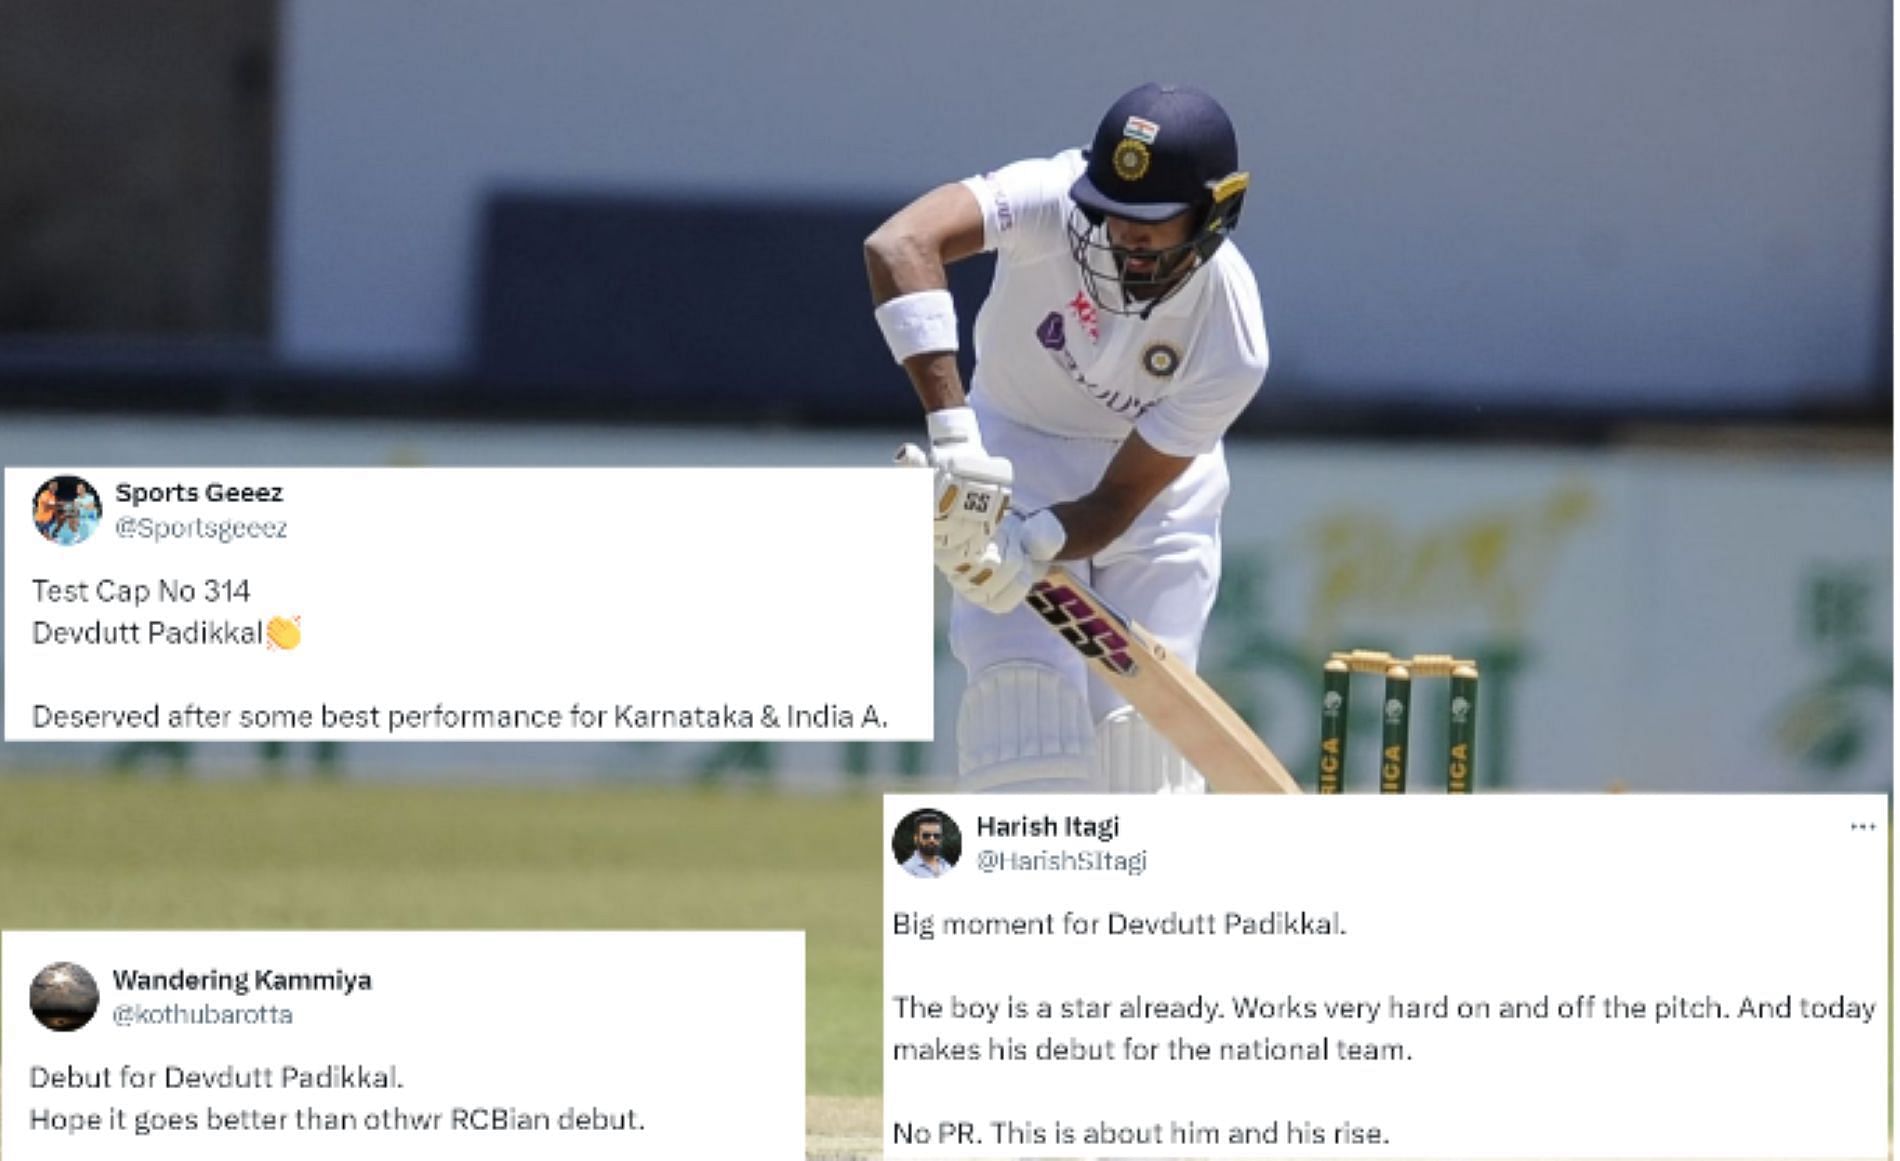 Hope it goes better than other RCBian debut" - Fans react to Devdutt  Padikkal making Test debut for India in 5th England Test